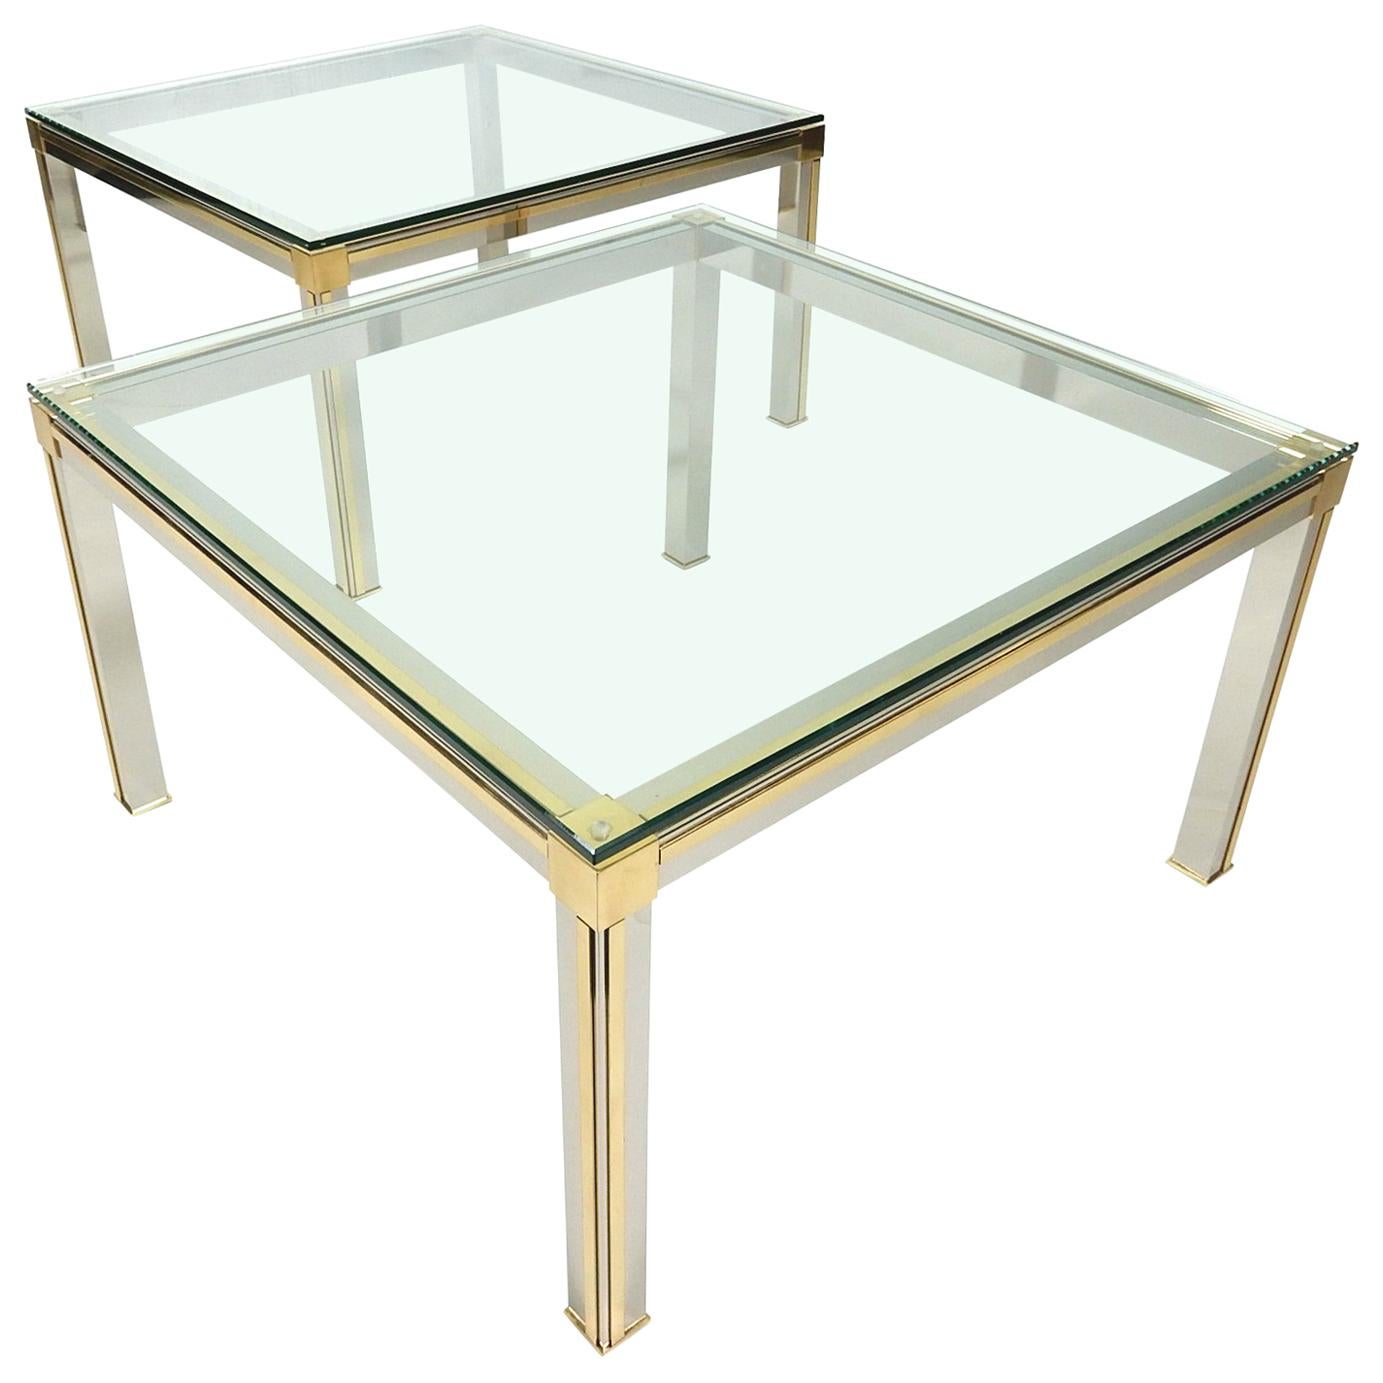 Designer Willy Rizzo Chrome, Brass and Glass Side Tables